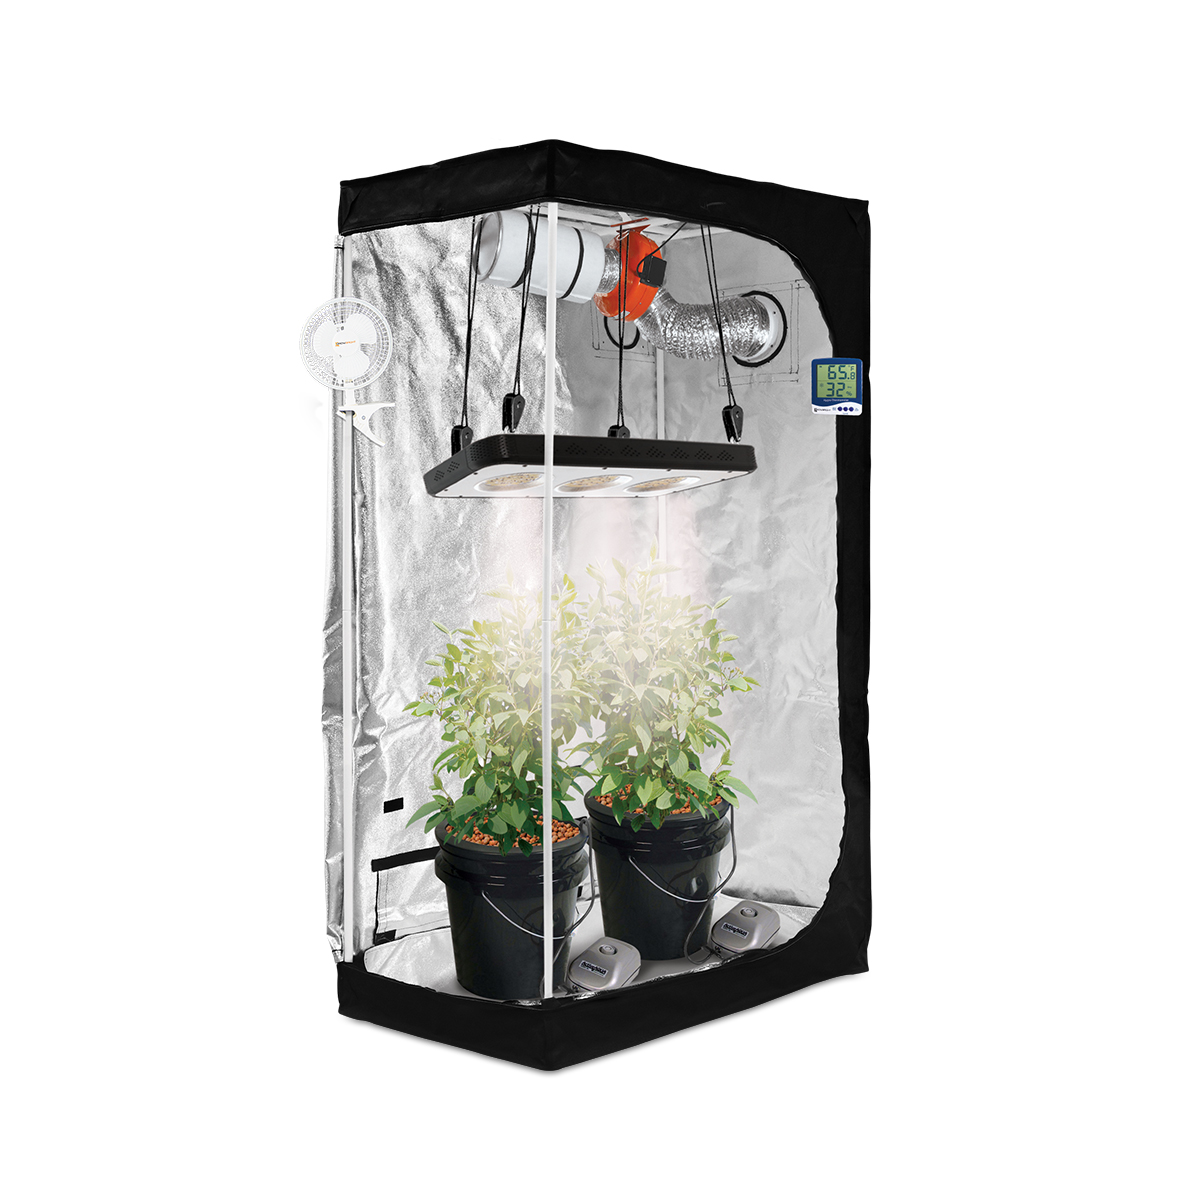 Small 2'x3' Hydroponic Grow Kit with HTG Supply